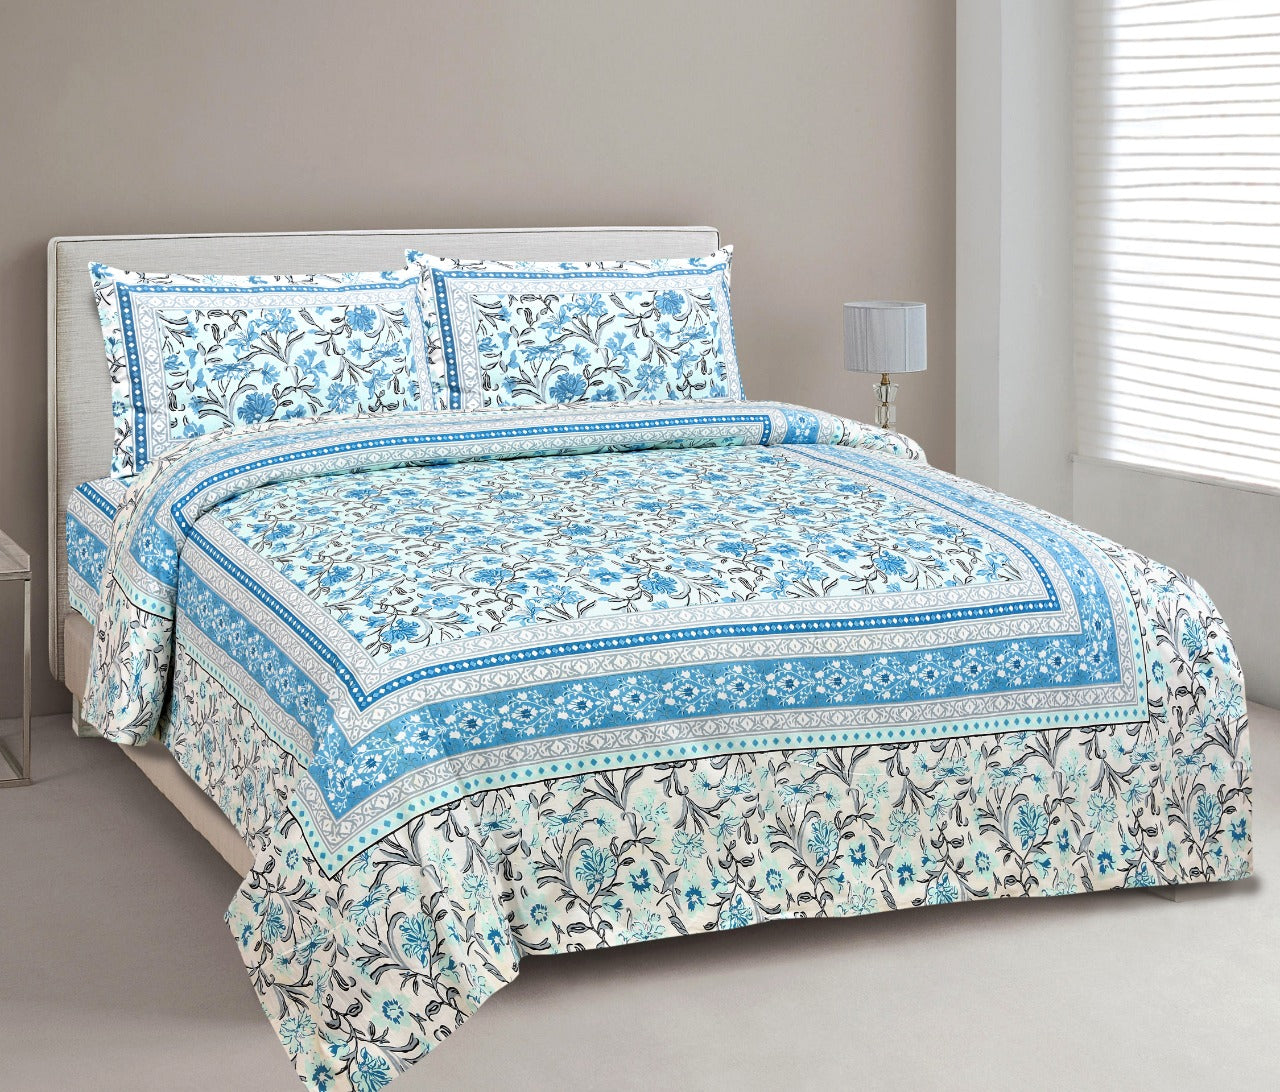 Bagru printed double bedsheet with pillow cover